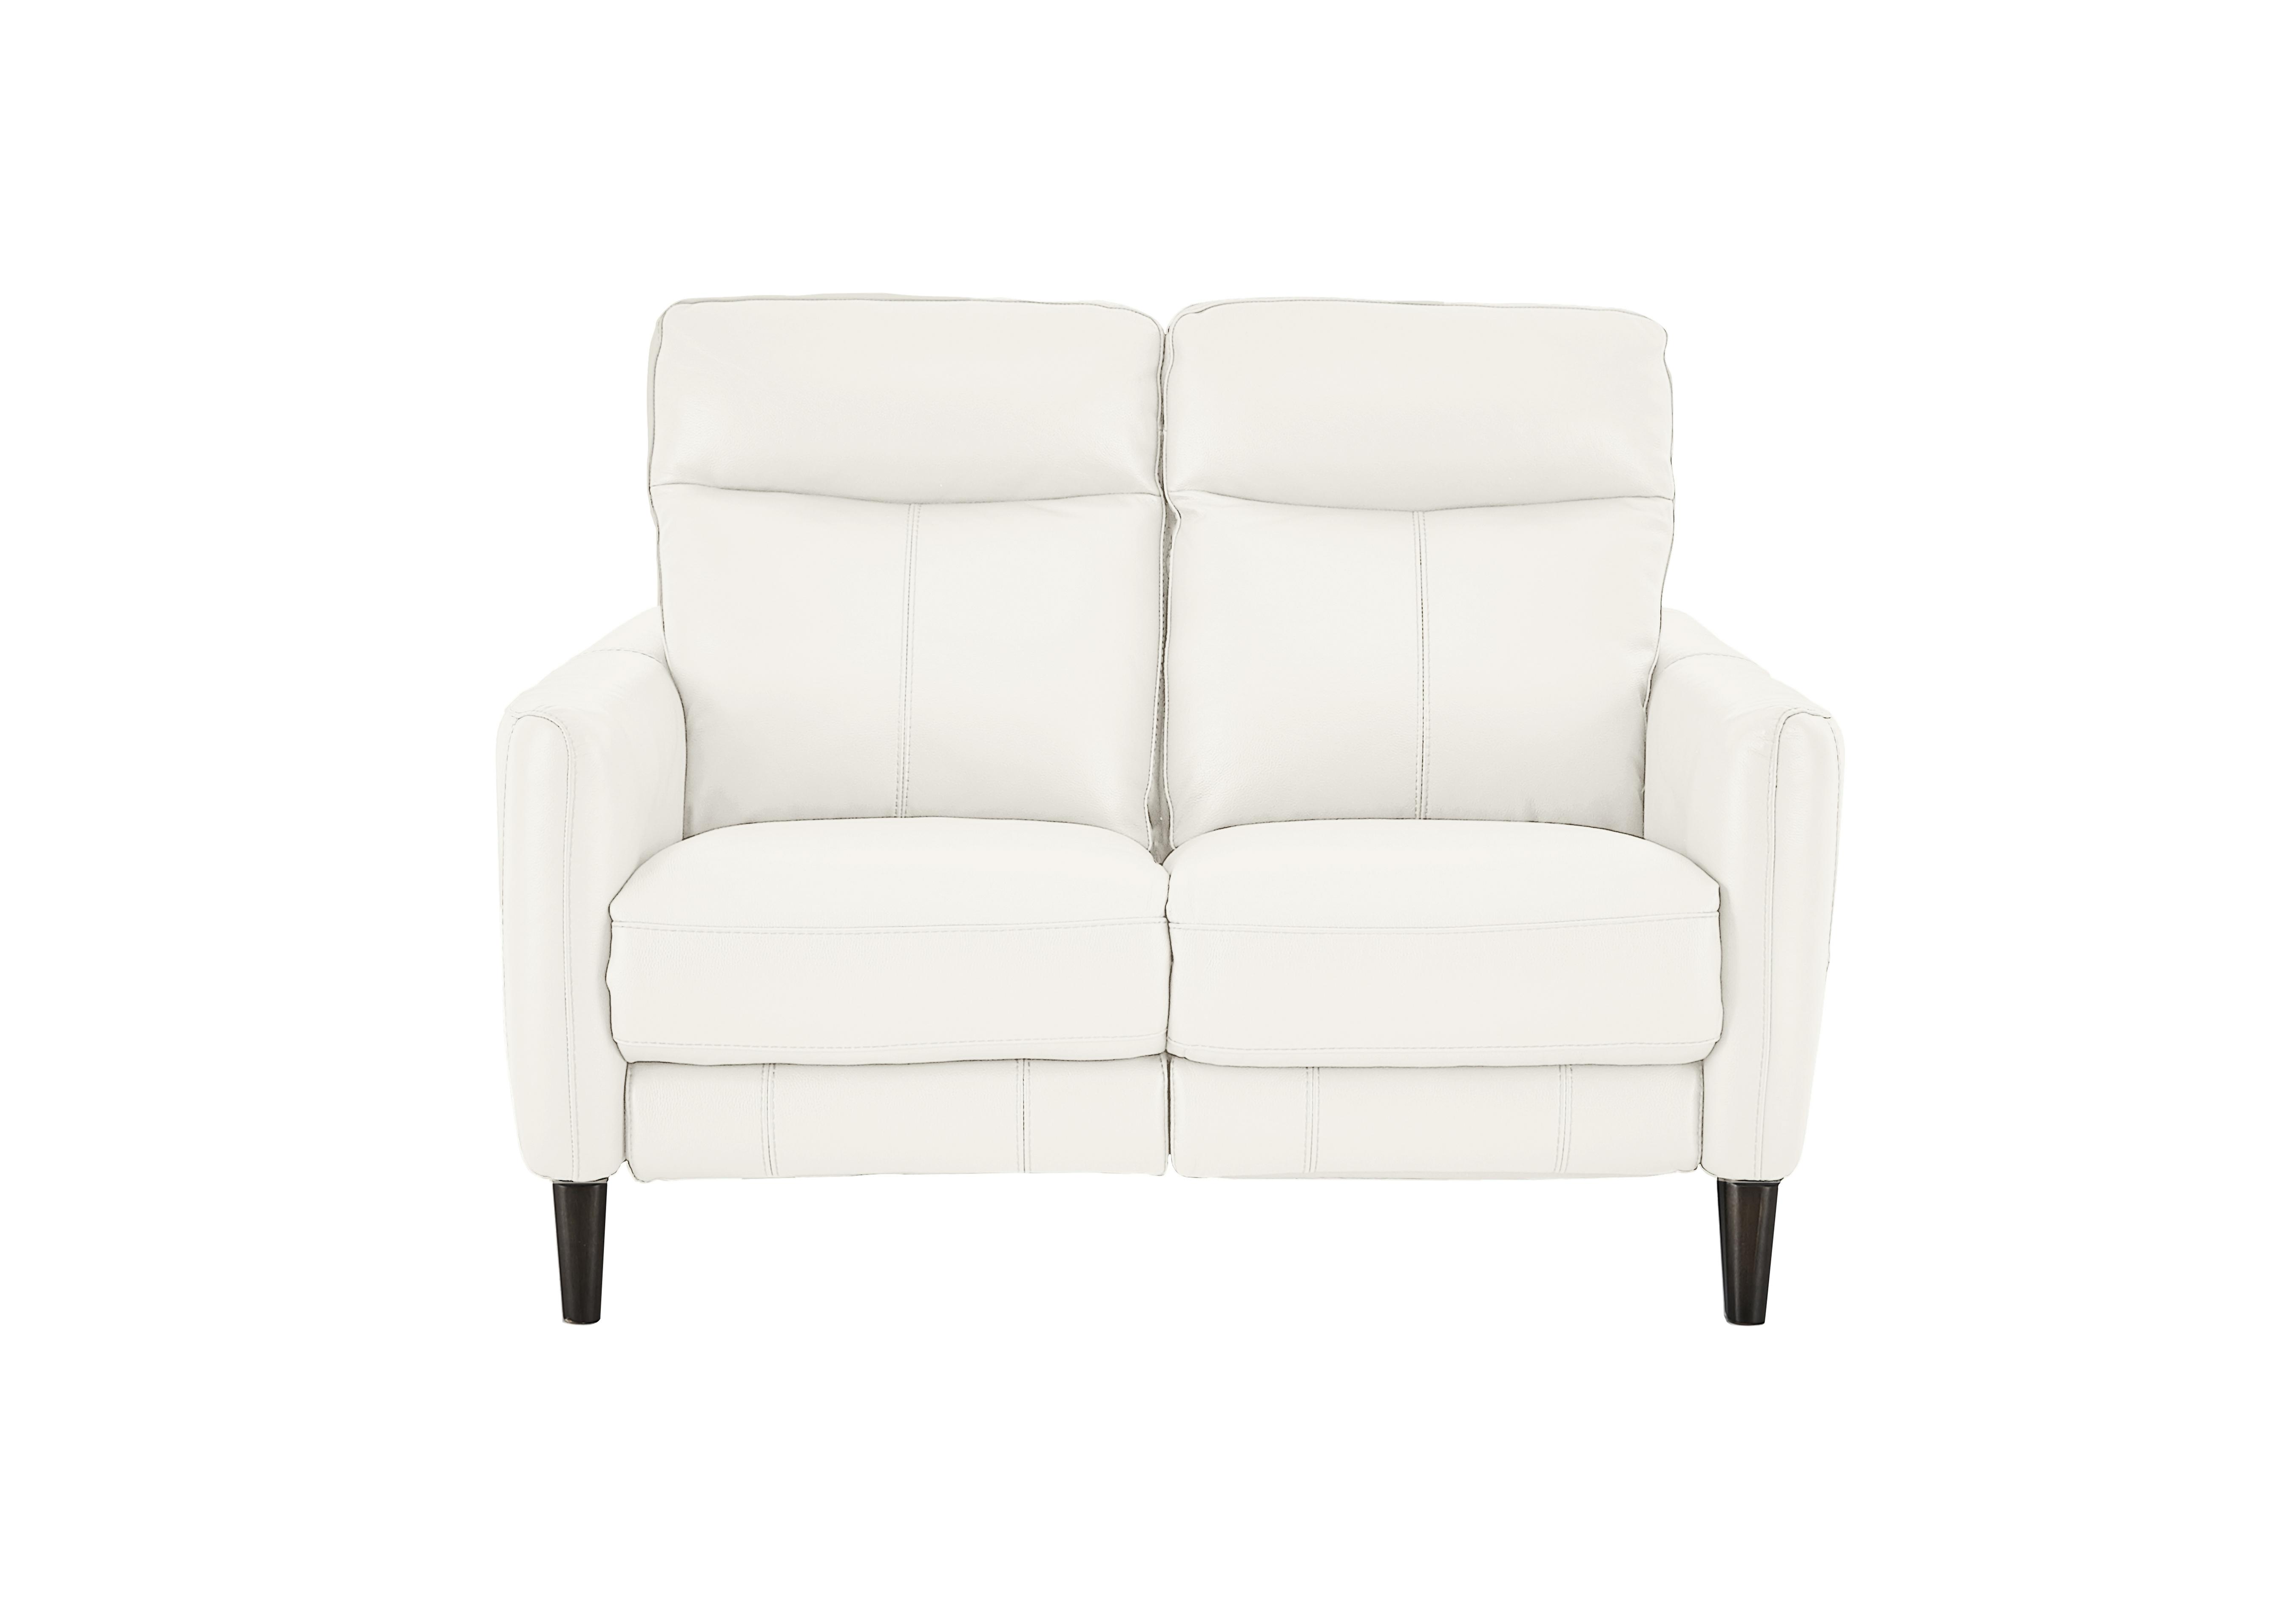 Compact Collection Petit 2 Seater Leather Sofa in Bv-744d Star White on Furniture Village